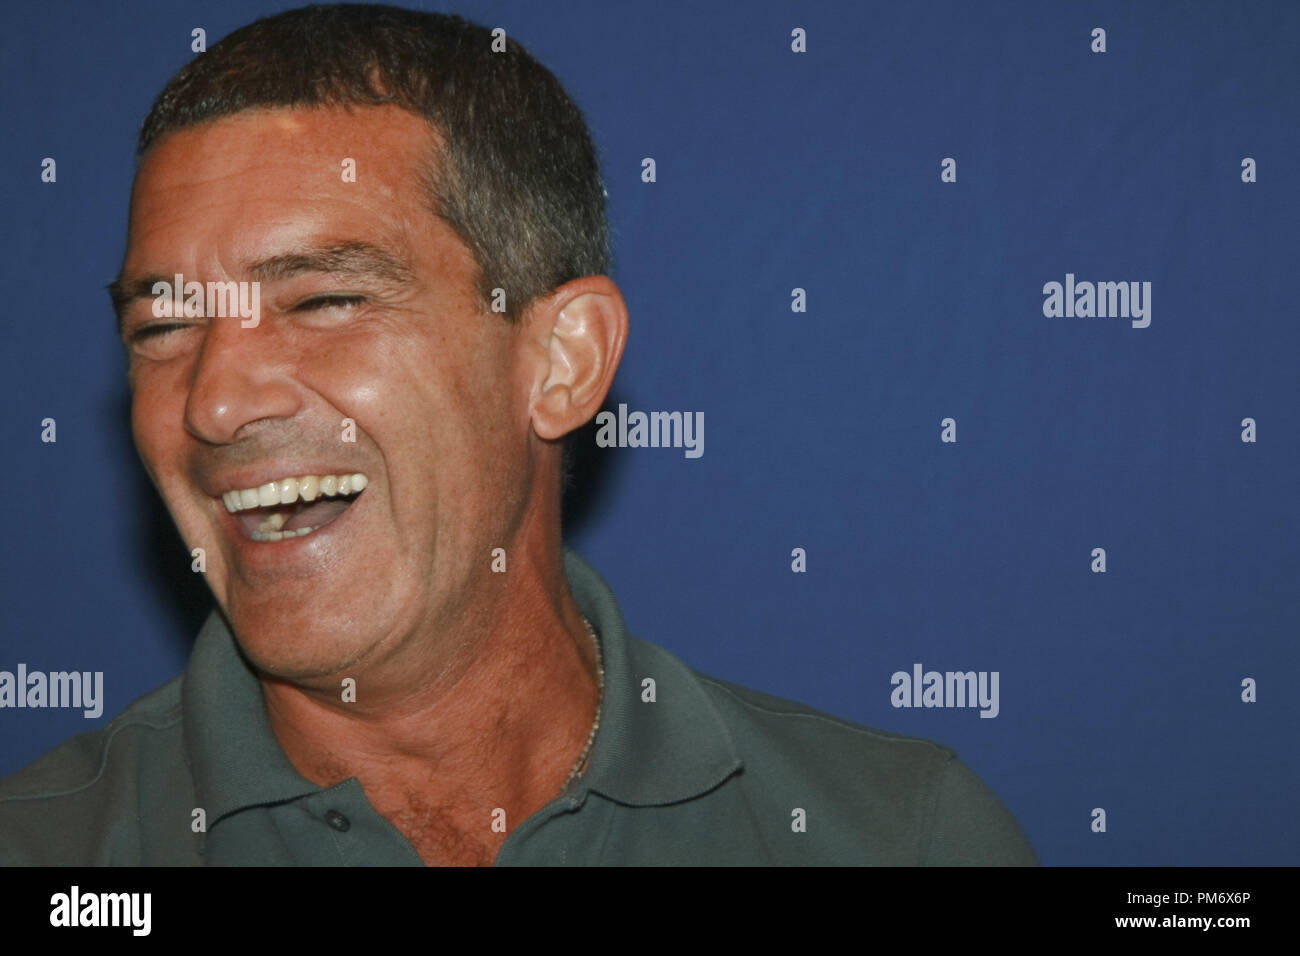 Antonio Banderas 'The Skin I Live In'  Portrait Session, September 12, 2011.  Reproduction by American tabloids is absolutely forbidden. File Reference # 31182 013JRC  For Editorial Use Only -  All Rights Reserved Stock Photo